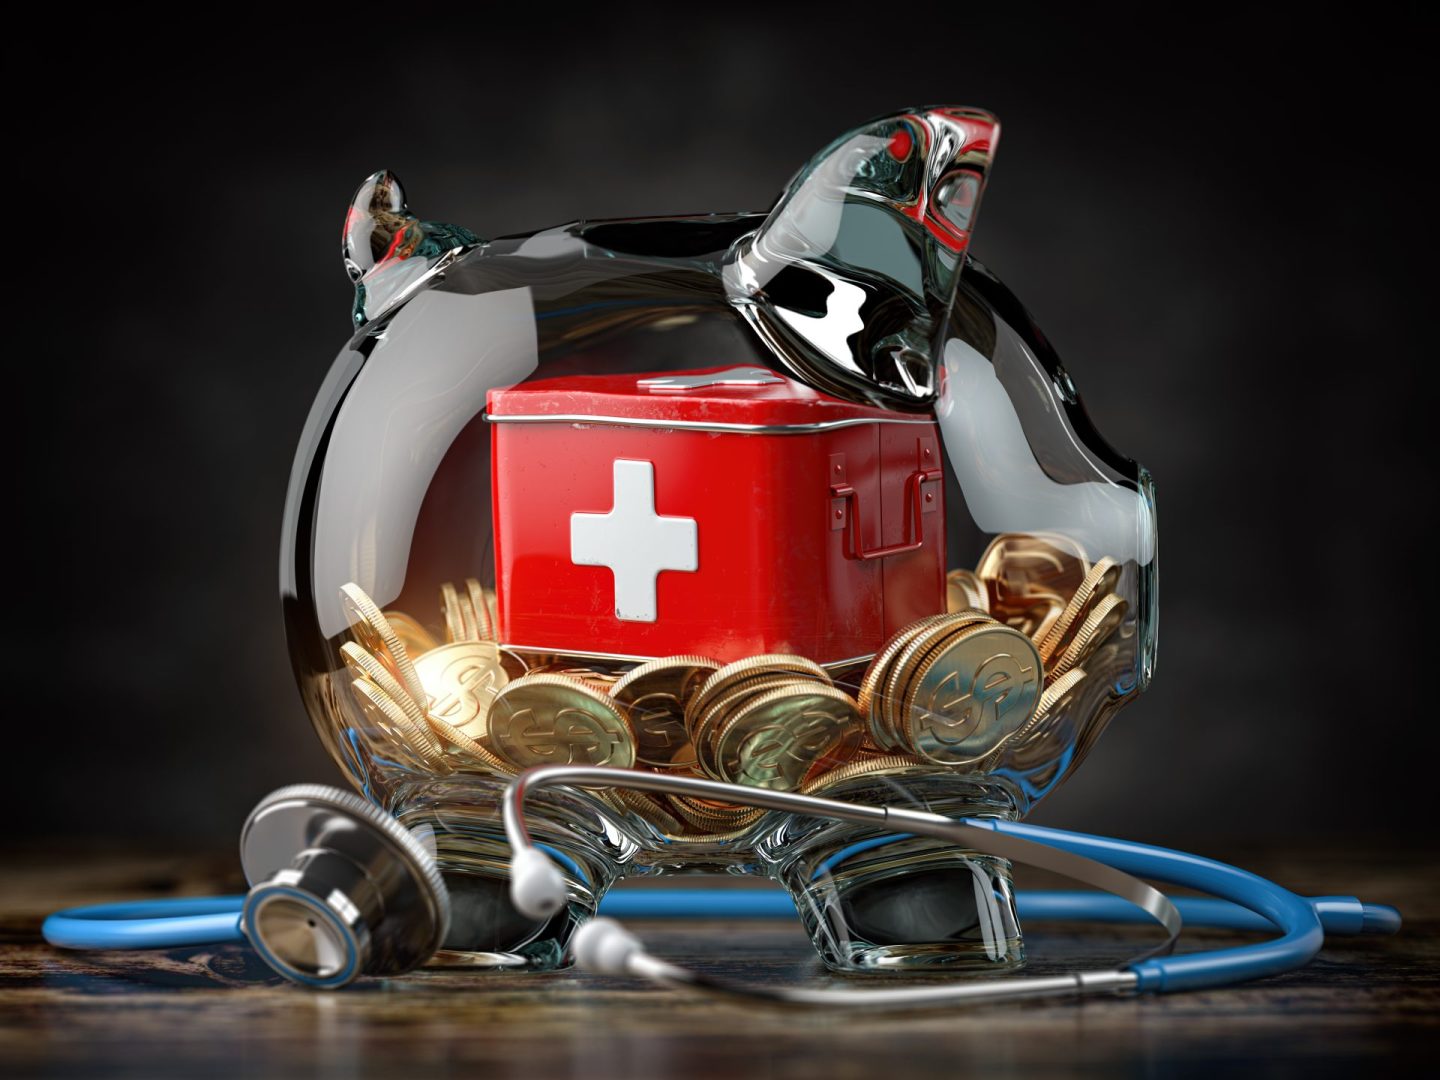 Glass piggy bank storing gold coins and a red tin box with a white cross healthy symbol on it. Doctor's stethoscope wraps around the piggy bank and rests on a wooden table against a black background